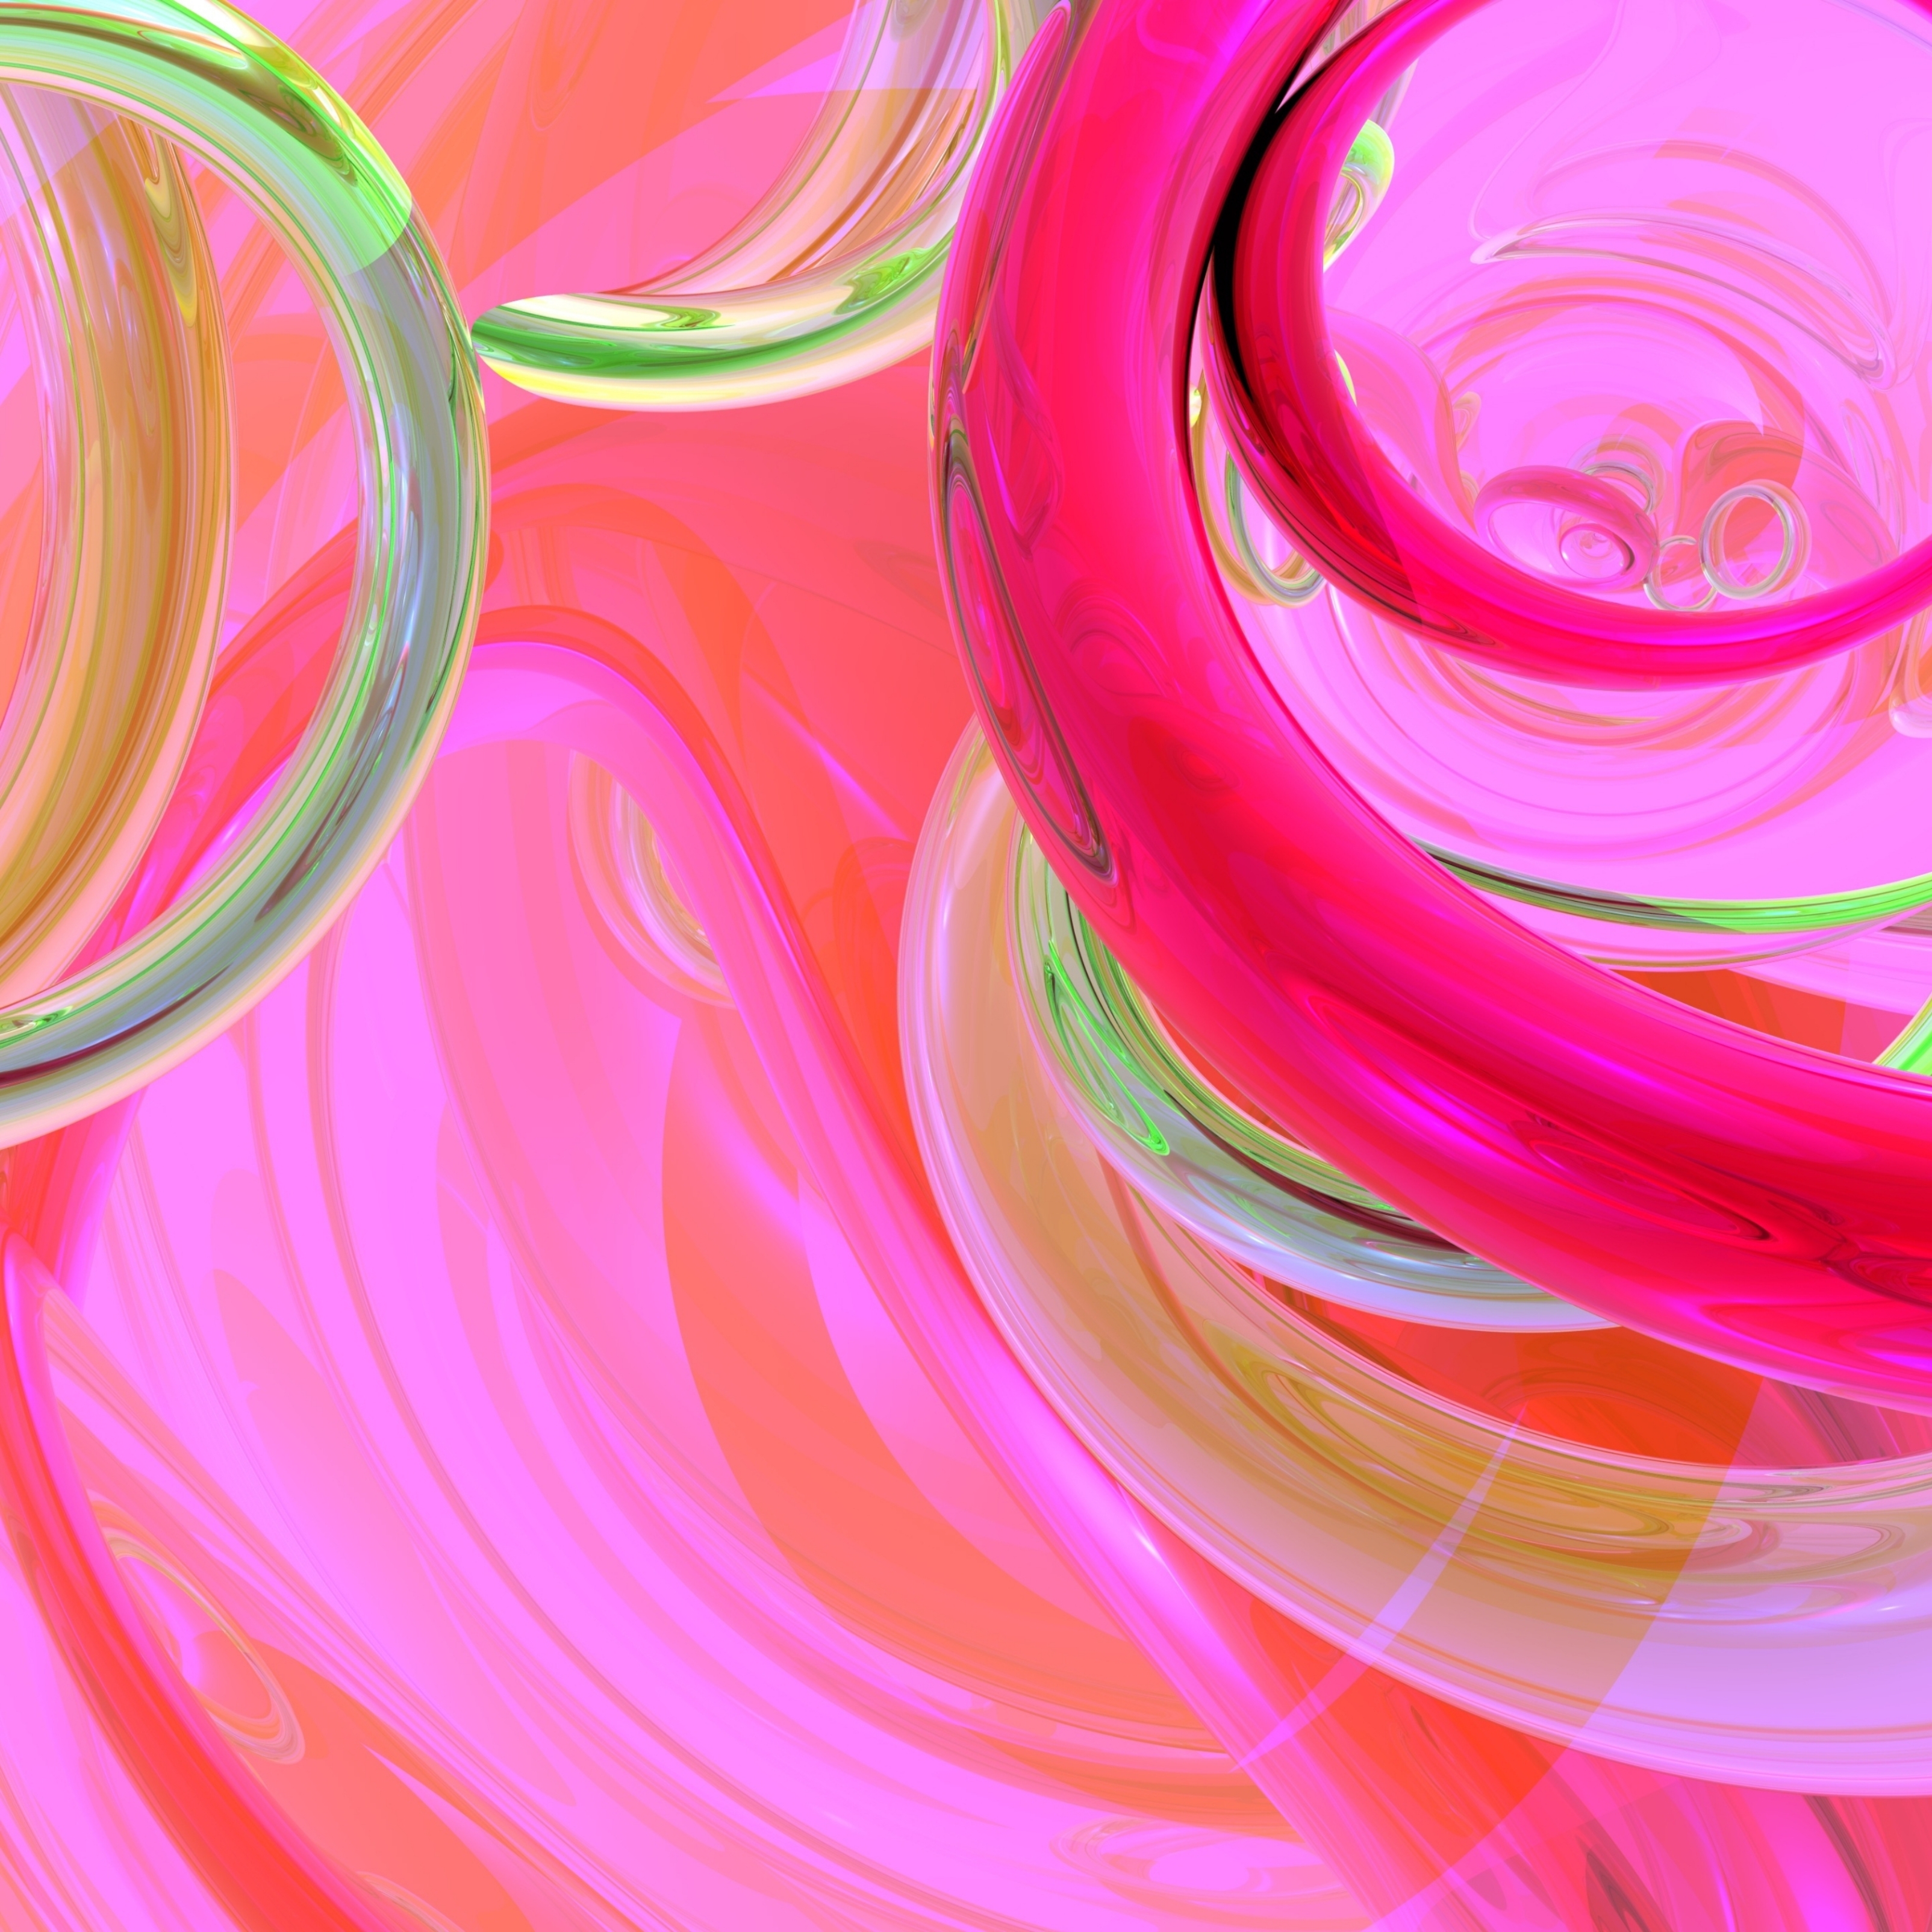 iPad Wallpapers Abstract Pink Design Reflection iPad Wallpaper 3208x3208 px